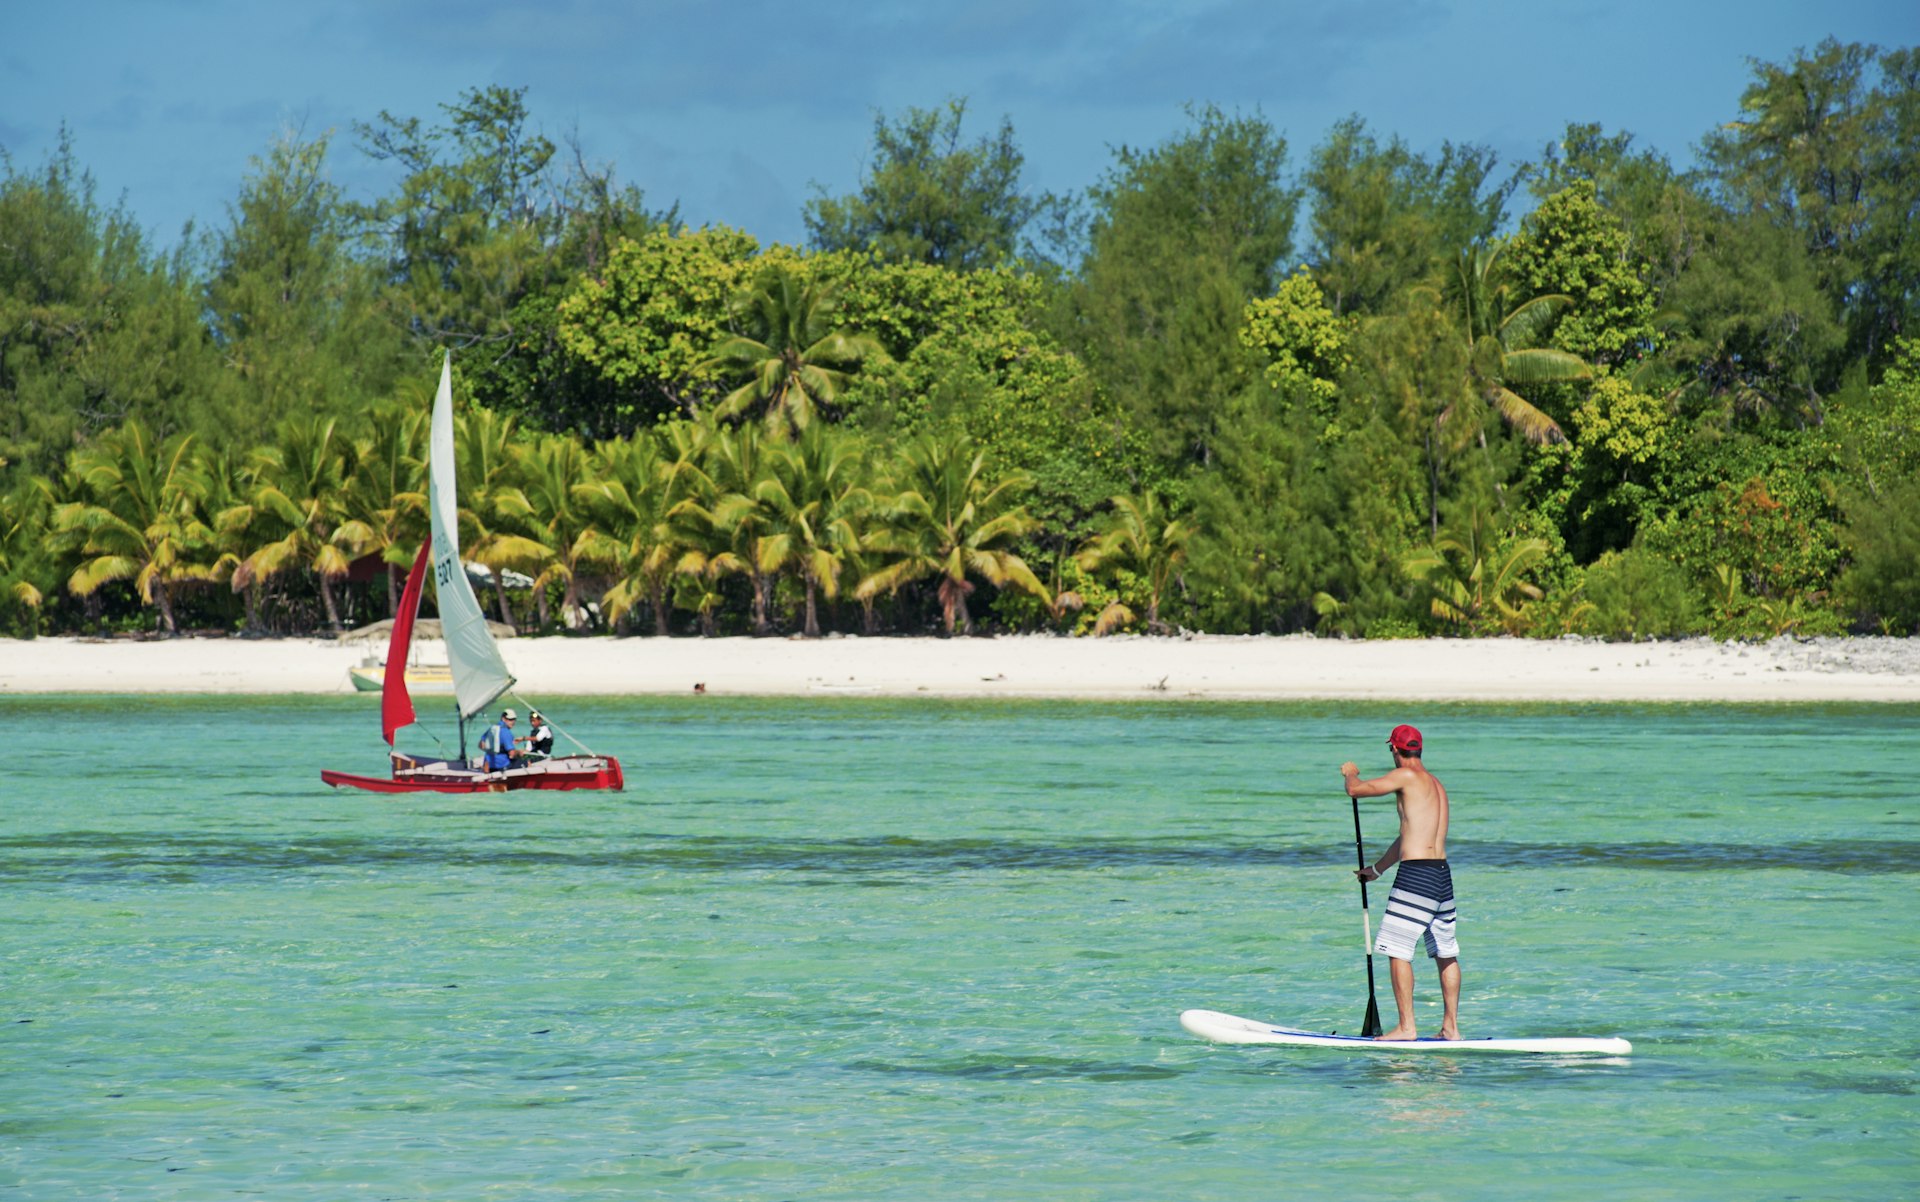 A man stand-up paddle-boarding on the crystal clear water of Muri Lagoon, with a small boat in the background